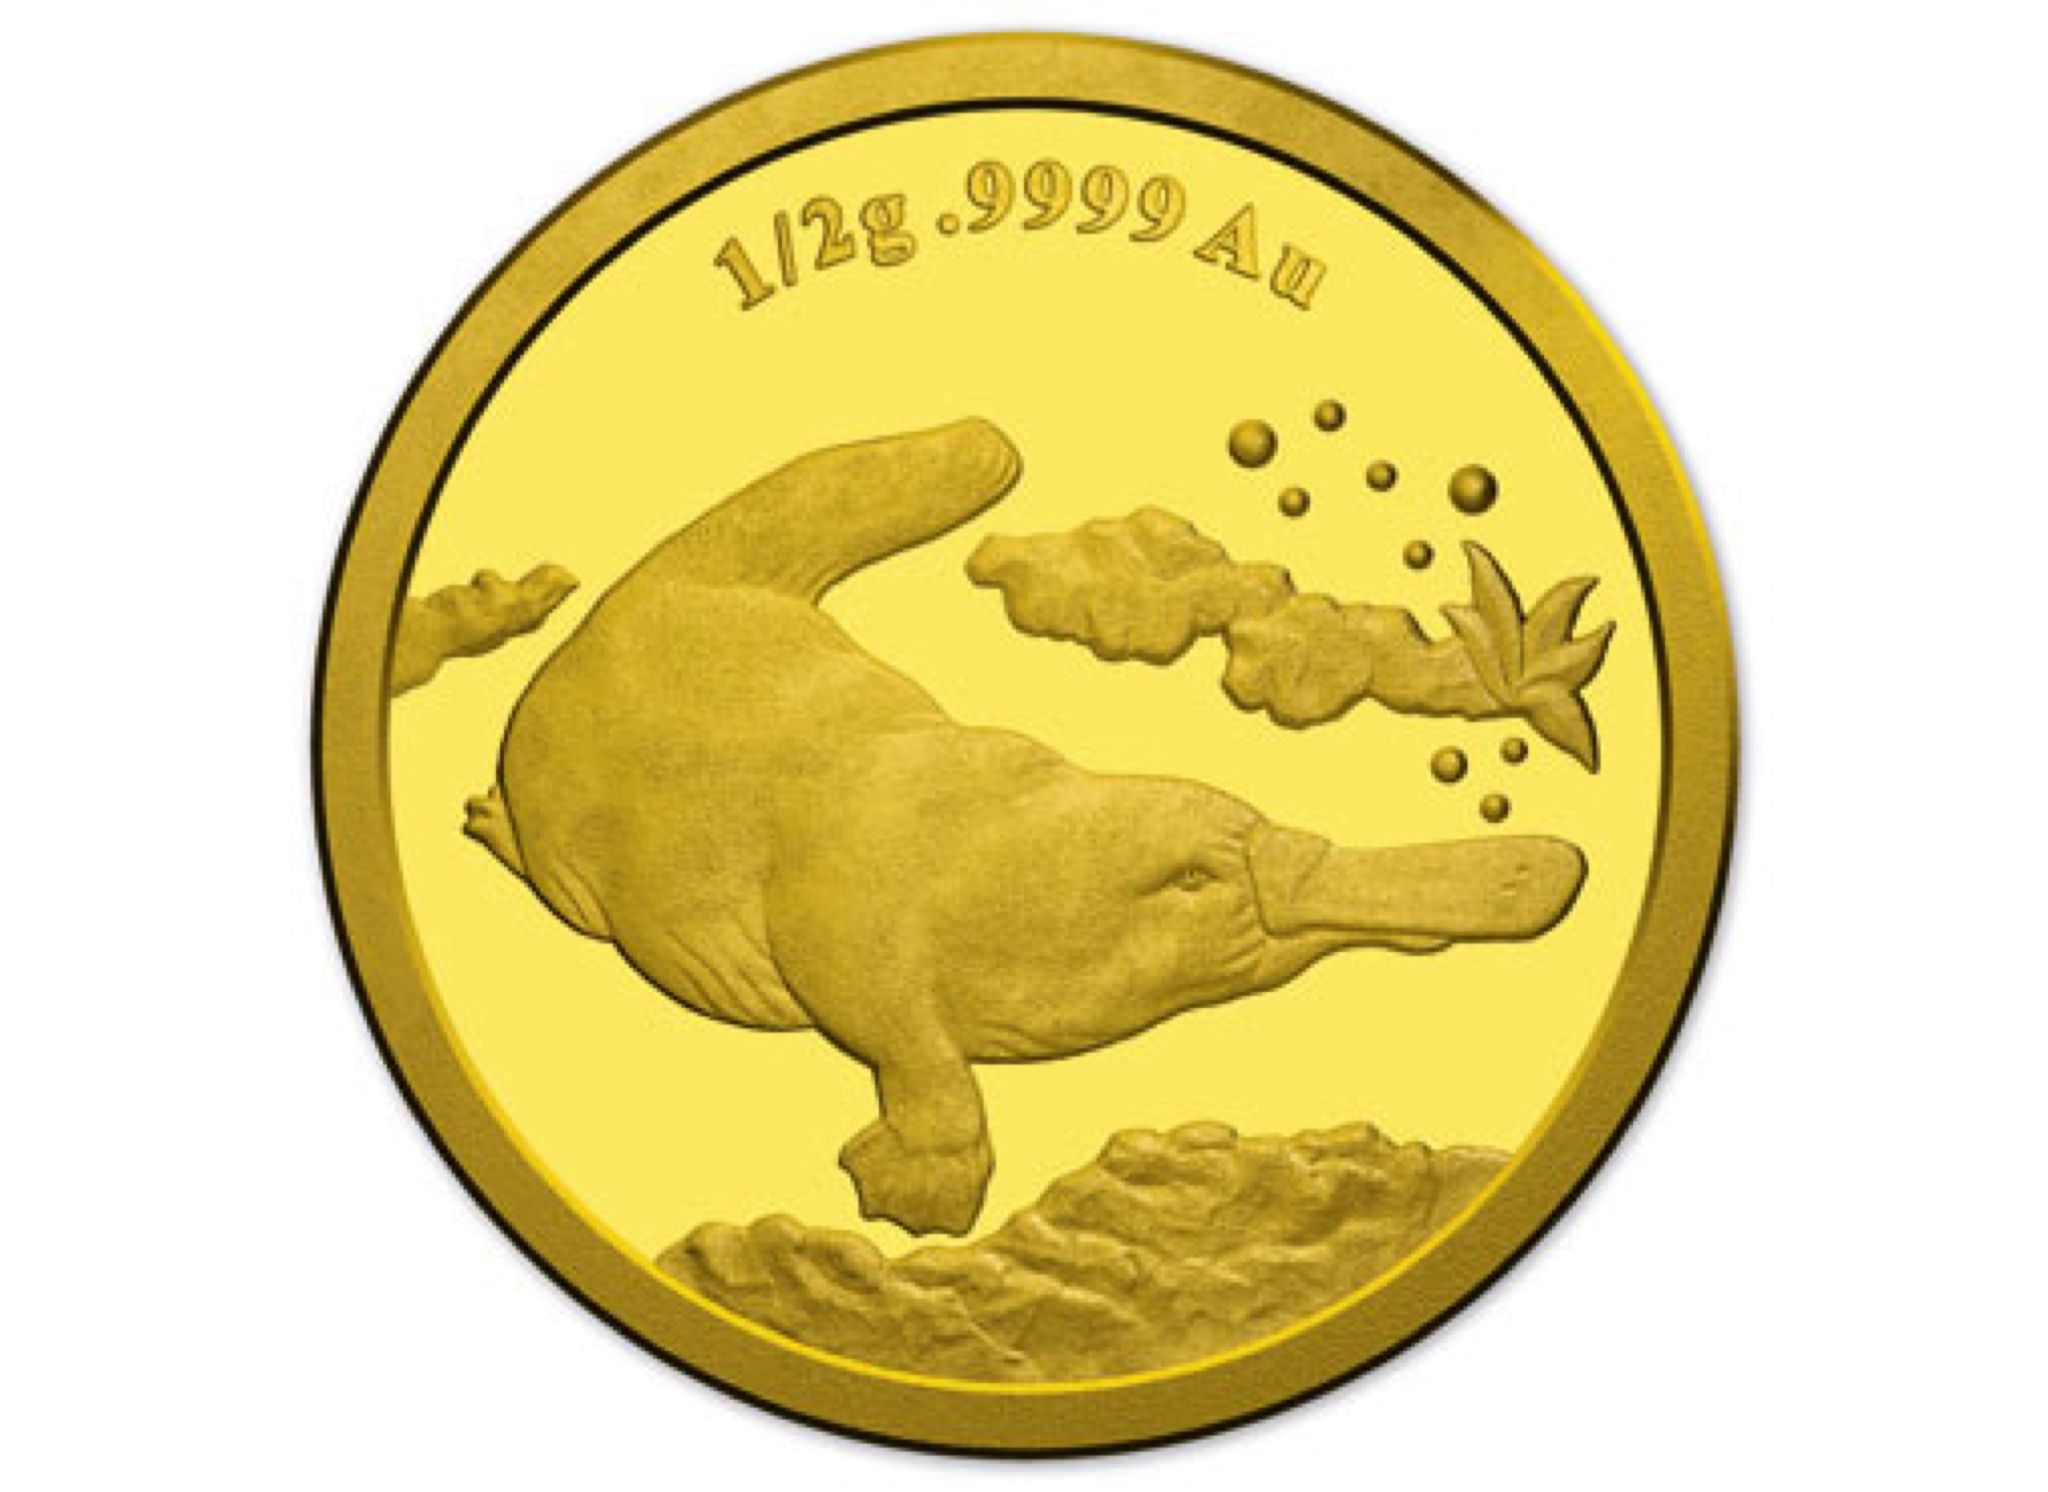 2014 $2 Gold Proof Coin - Platypus  coin collectible [Barcode 9314682103111] - Main Image 1